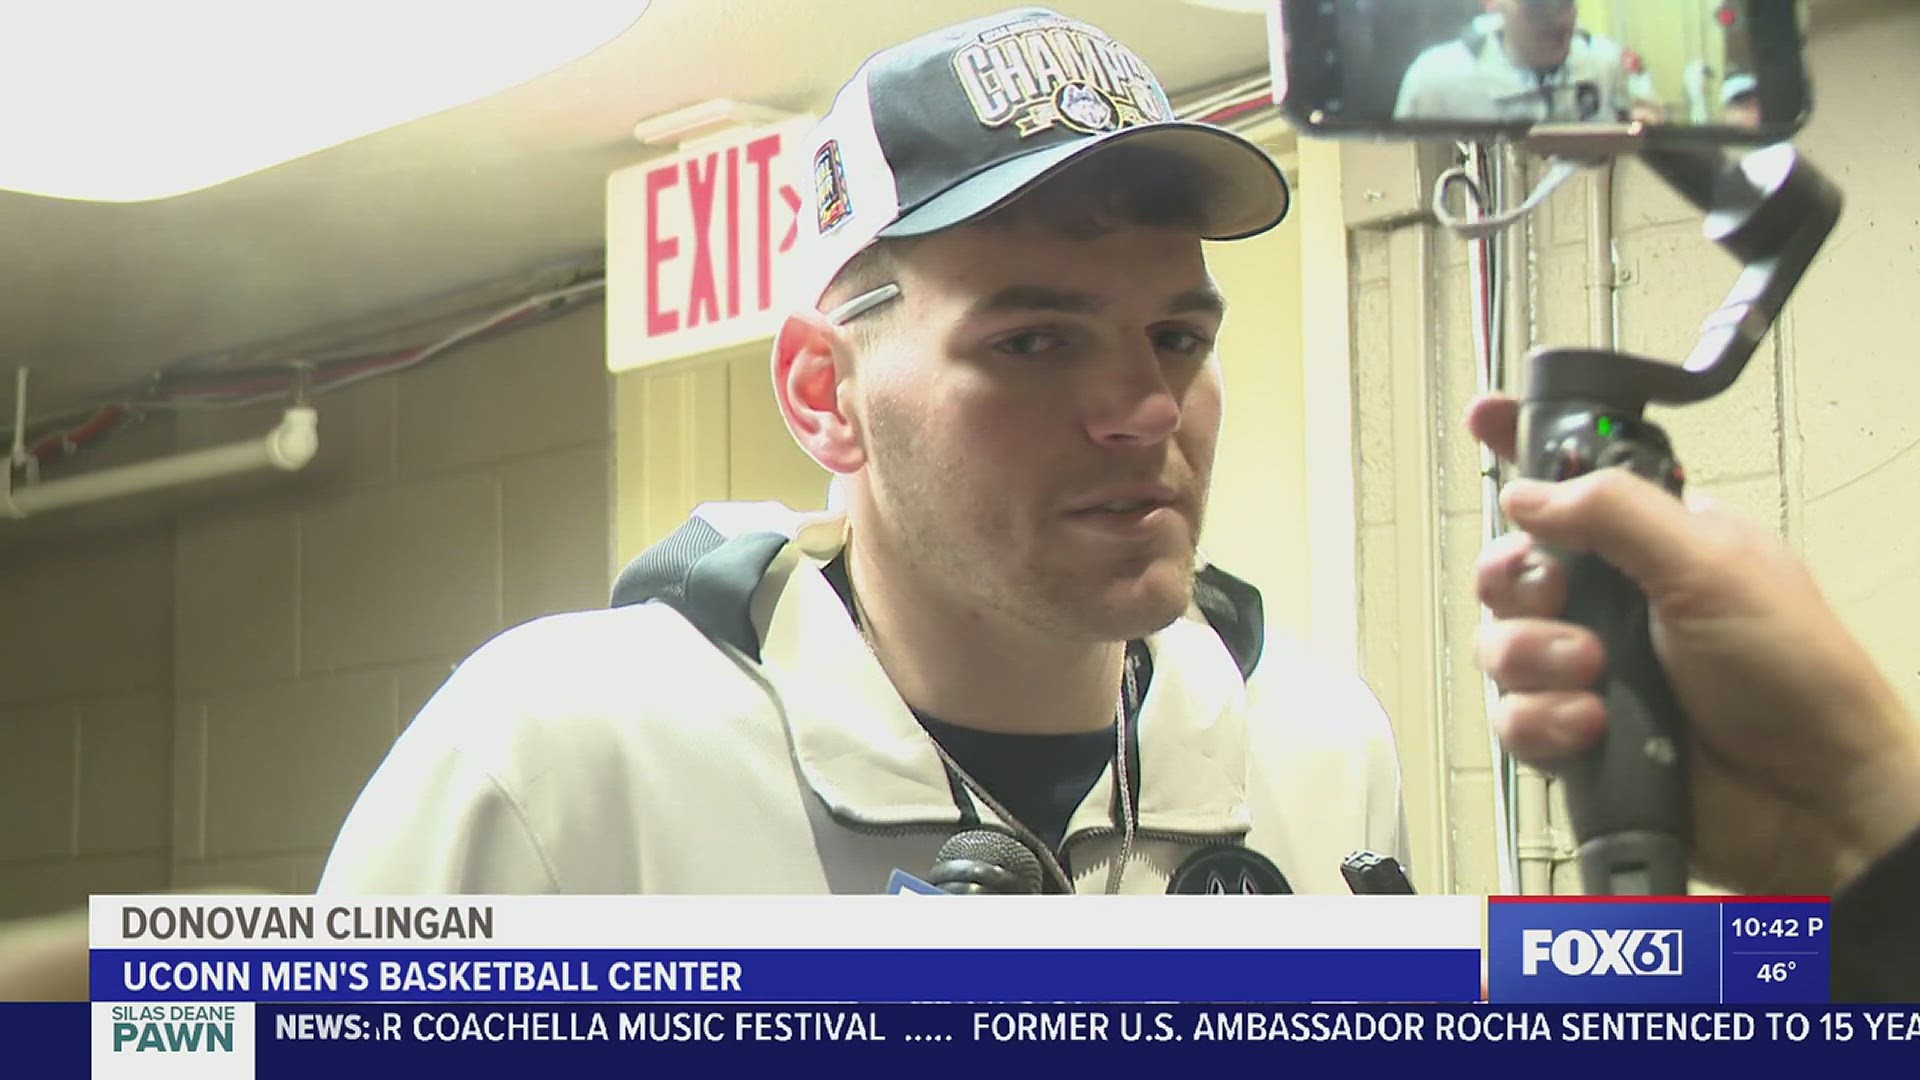 FOX61's Jonah Karp caught up with the UConn Huskies following the victory parade on Saturday.